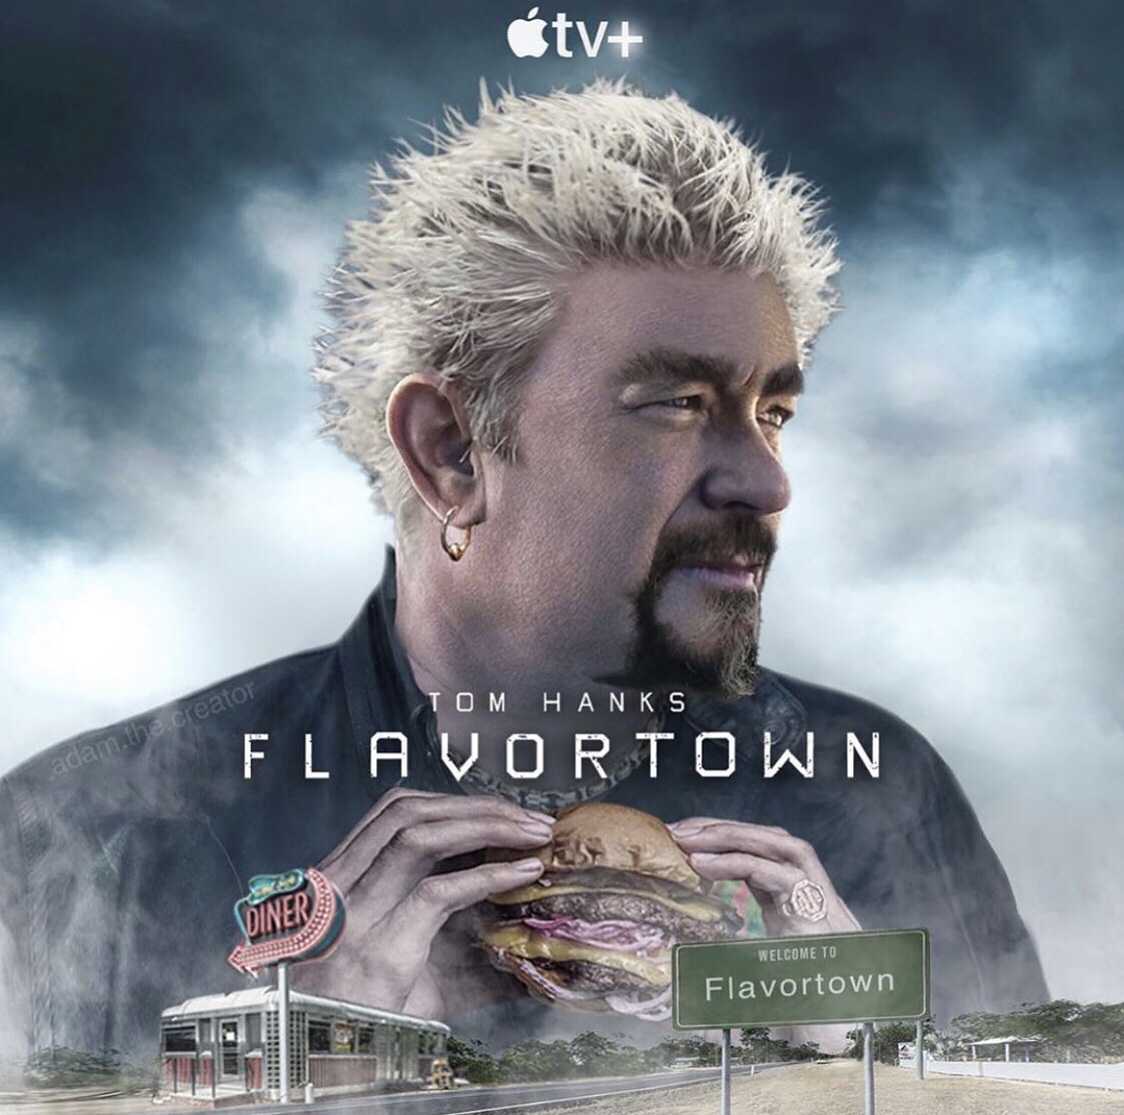 album cover - ty Tom Hanks adam the creator Flavor Town Soiner Welcome To Flavortown